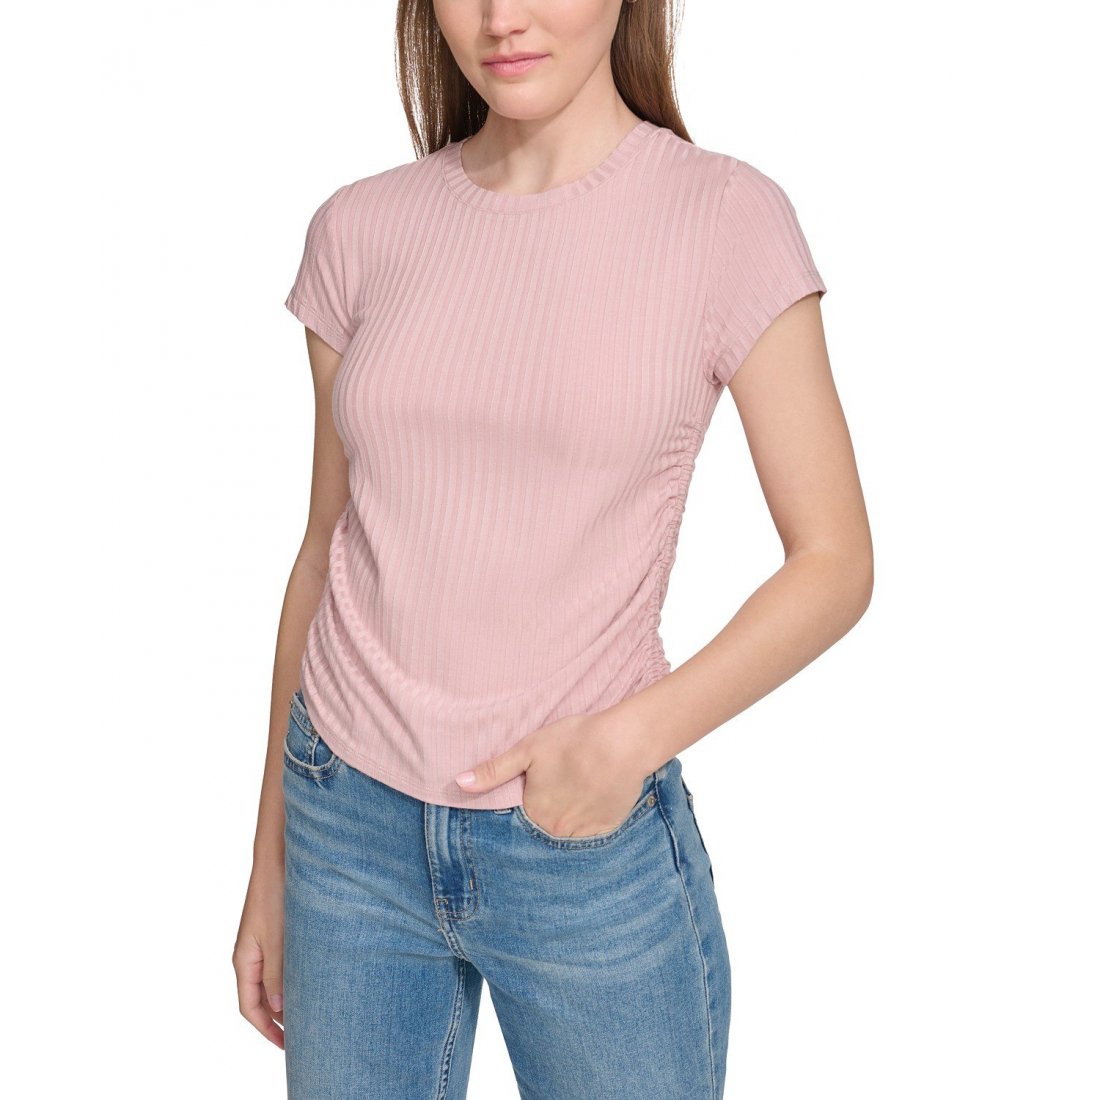 Women's 'Side-Ruched' Crop Top